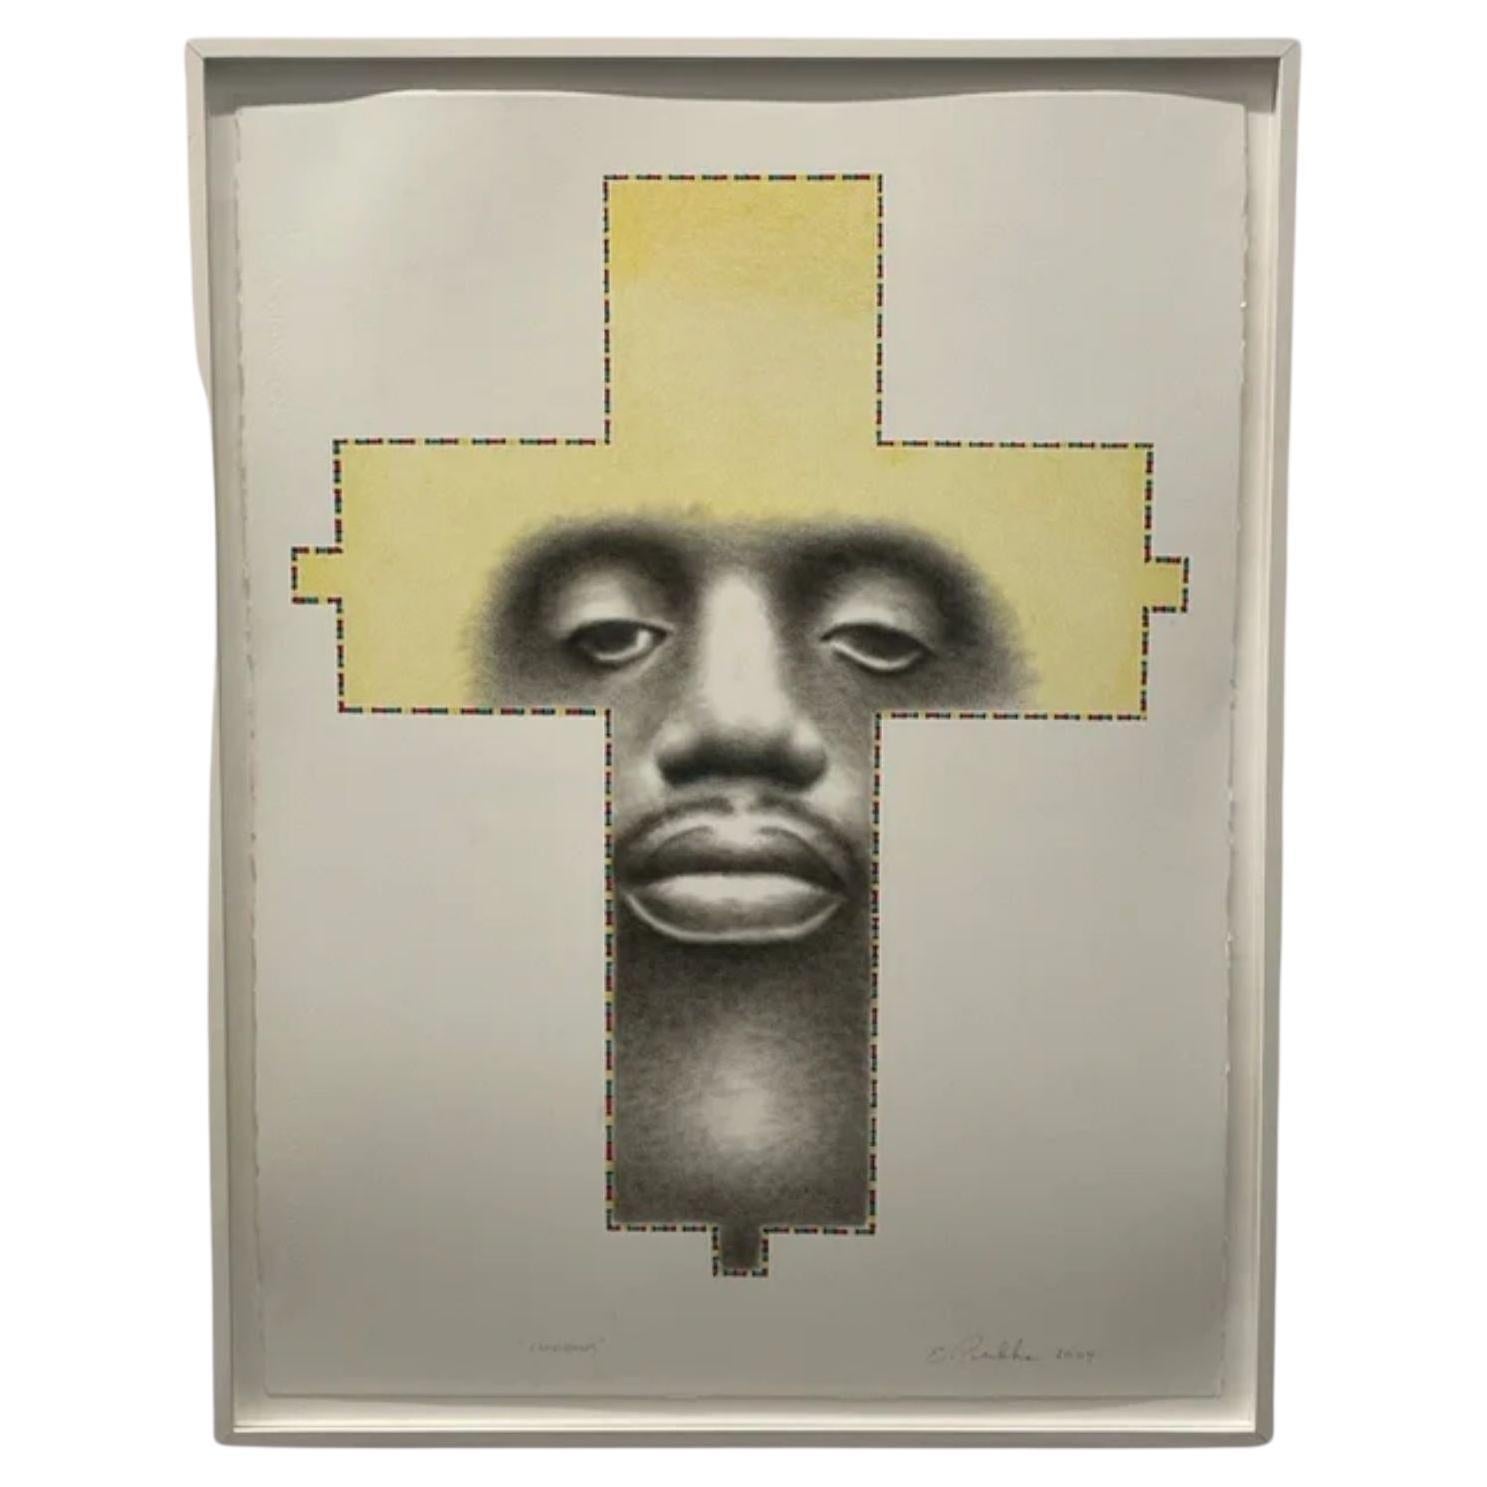 "Cross Block" Media Drawing on Paper by Ed Paschke, 2004